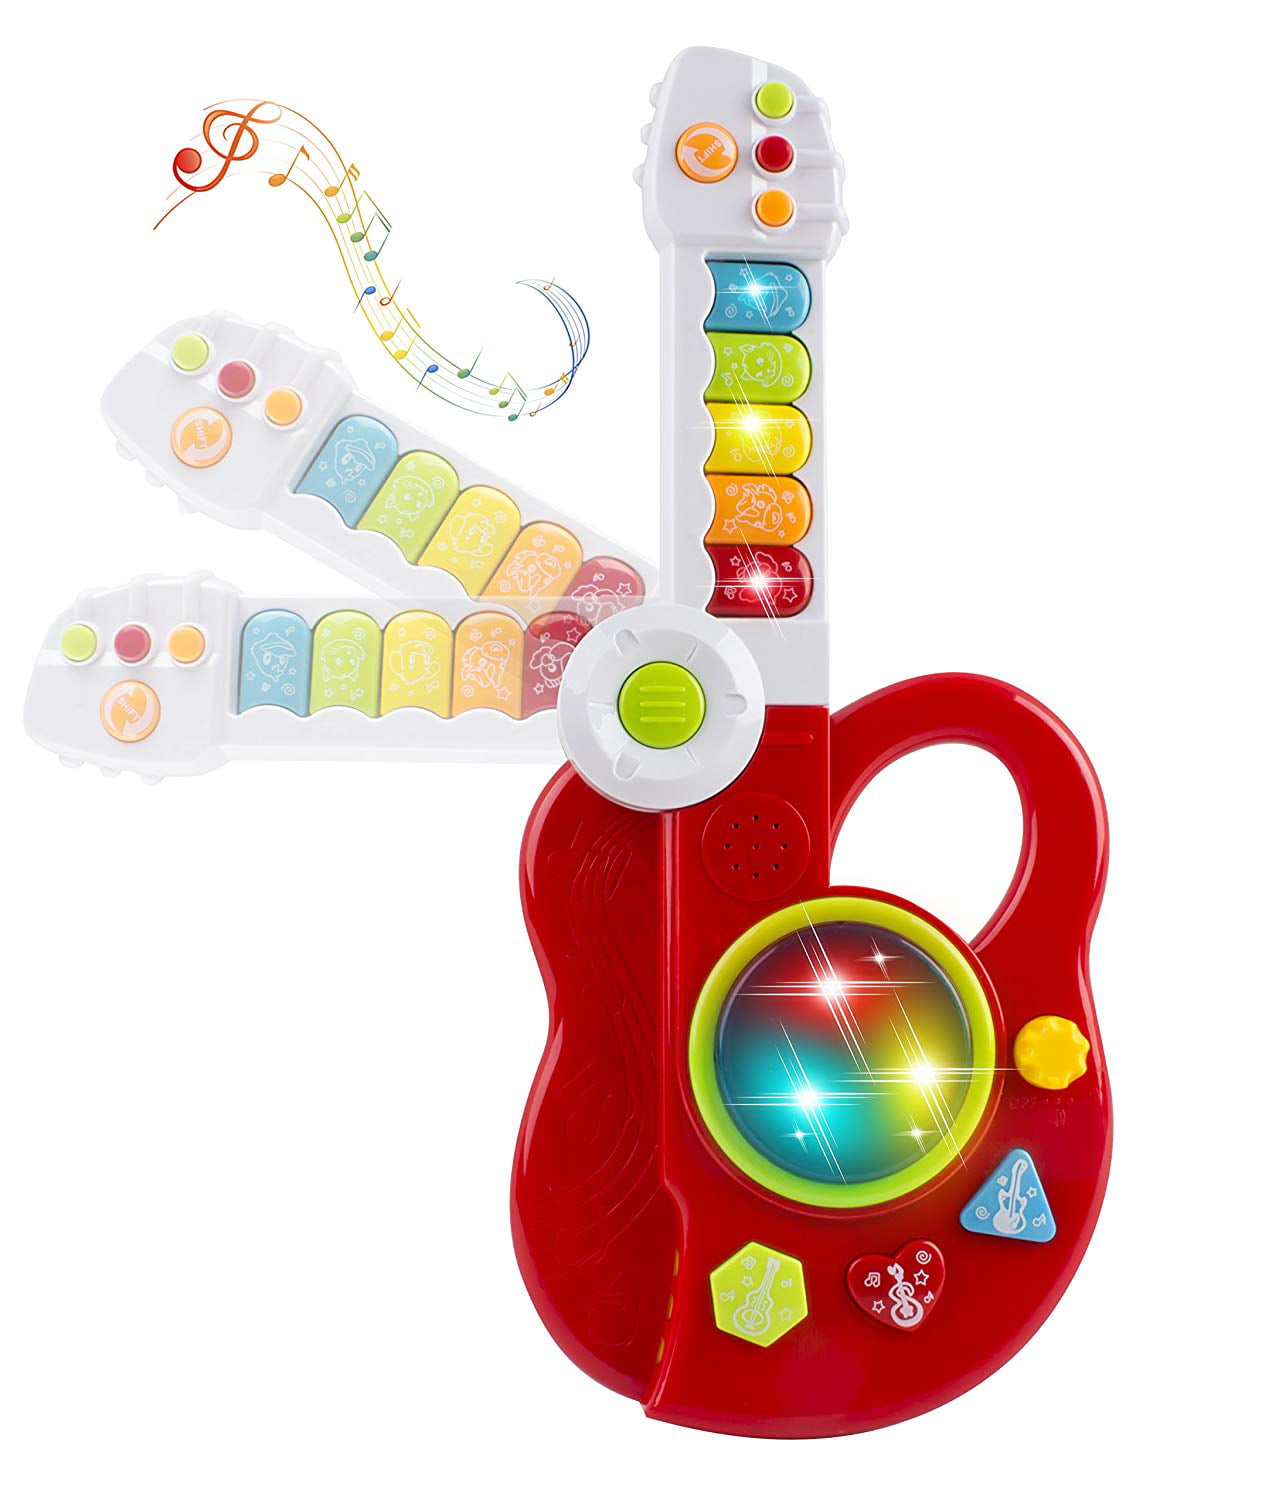 Red Toy Guitar 3-in-1 Musical Toy Guitar,Keyboard,Jazz Drum 3D Light Toy for Kids Musical Instrument Playset w/ Music Lights 